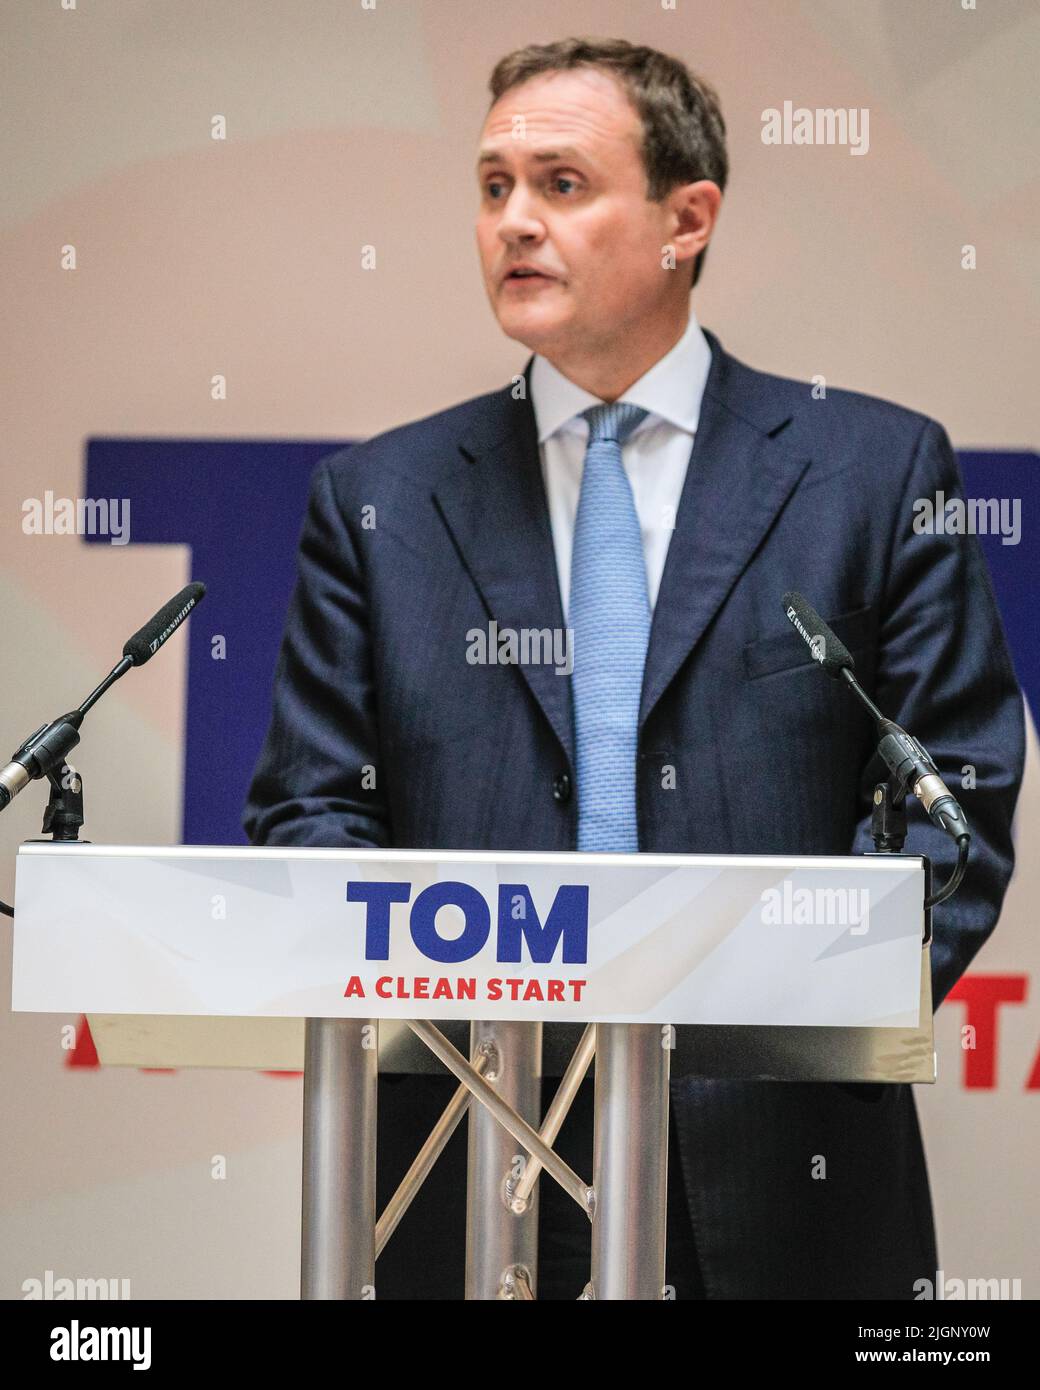 London, UK. 12th July, 2022. Tom Tugendhat, MP, chair of the Commons Foreign Affairs Select Committee, launches his campaign for the conservative Party leadership and to be the next Prime Minister of the UK at Millbank in London today. The MP for Tonbridge and Malling has the backing of Cabinet Minister Anne-Marie Trevelyan, MPs Caroline Nokes, Damian Green, and currently around 21 public backers in total. Credit: Imageplotter/Alamy Live News Stock Photo